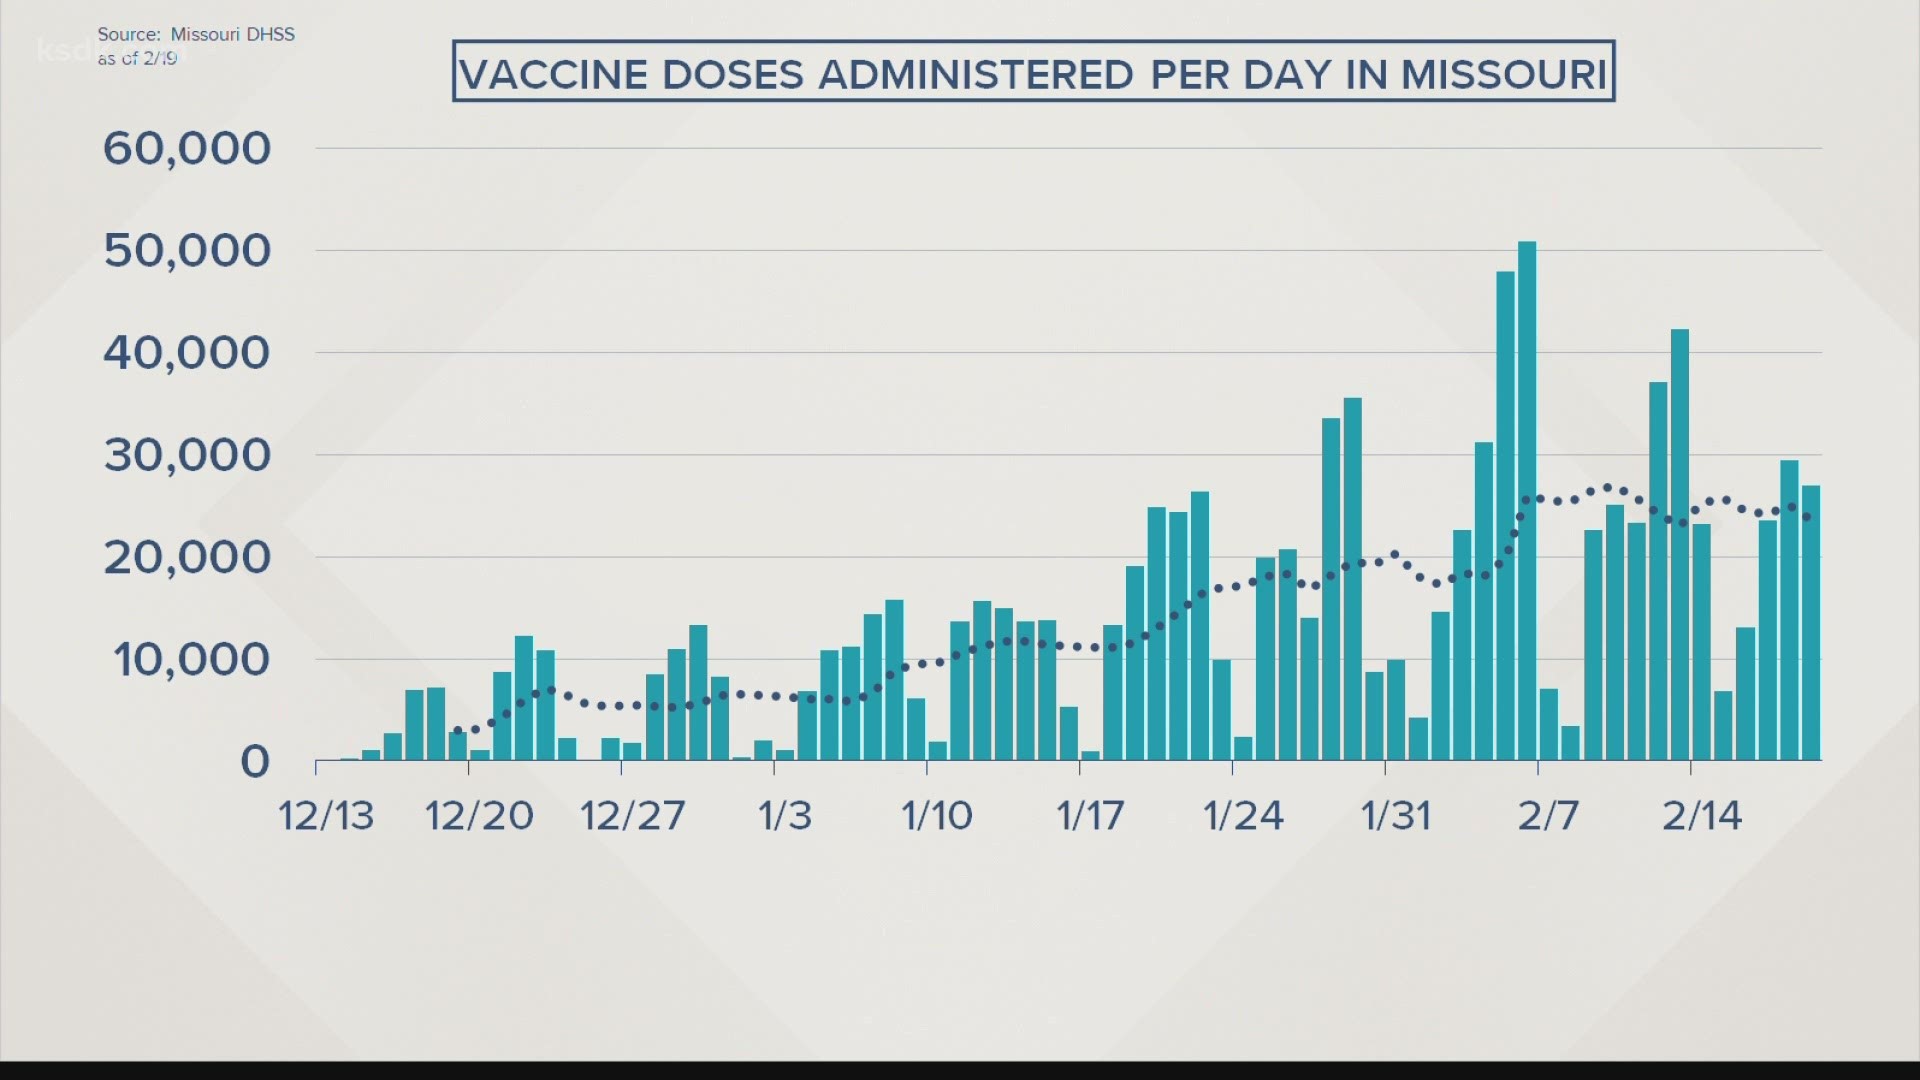 The head of the state health department says Missouri needs 2 and a half to 3 million people vaccinated to reach herd immunity